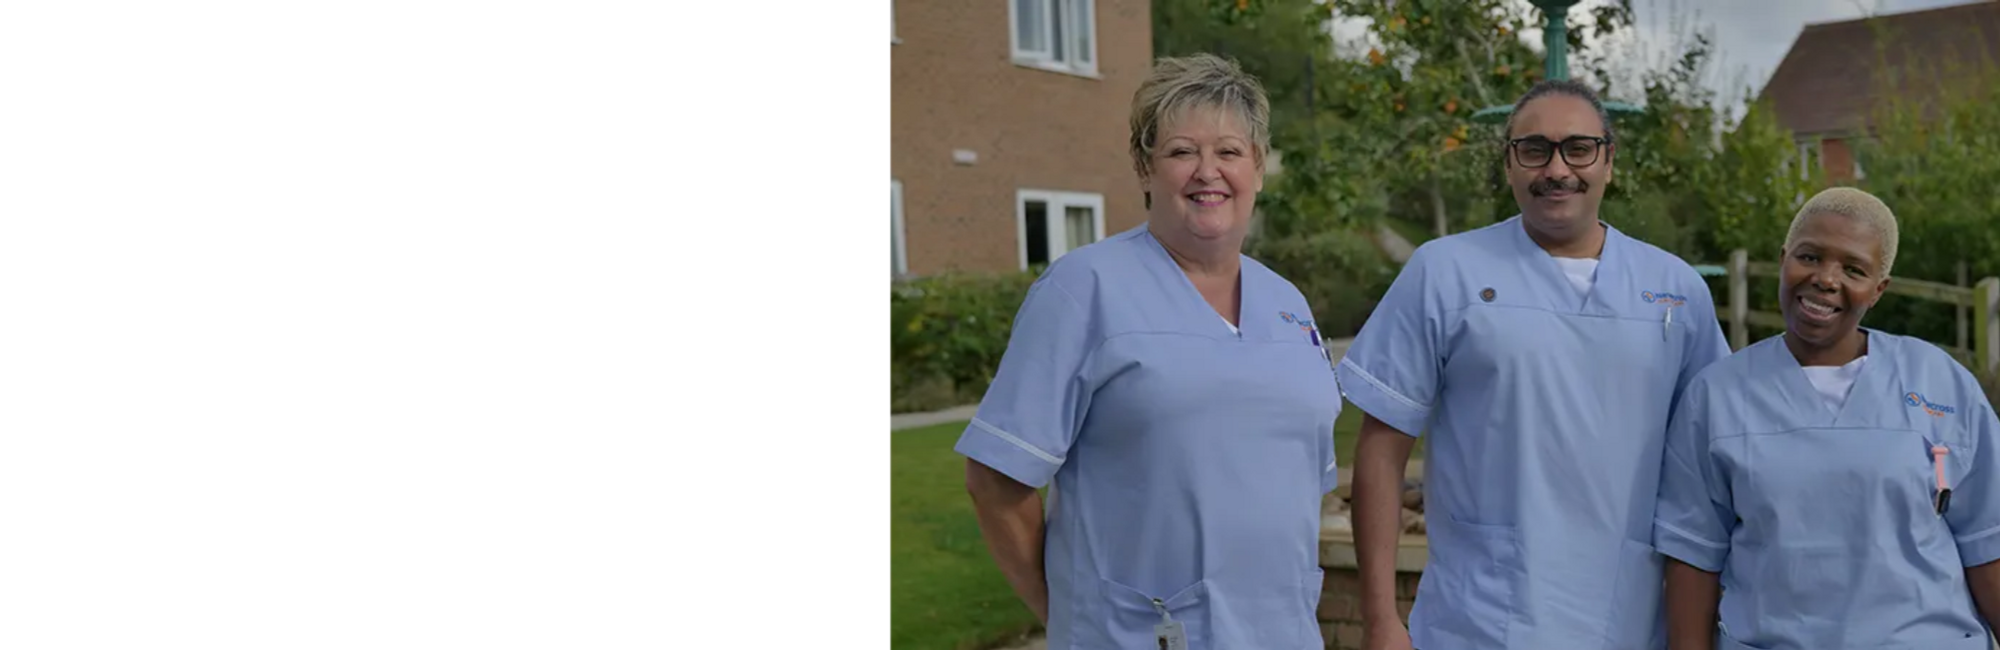 Newcross Healthcare: voices of care